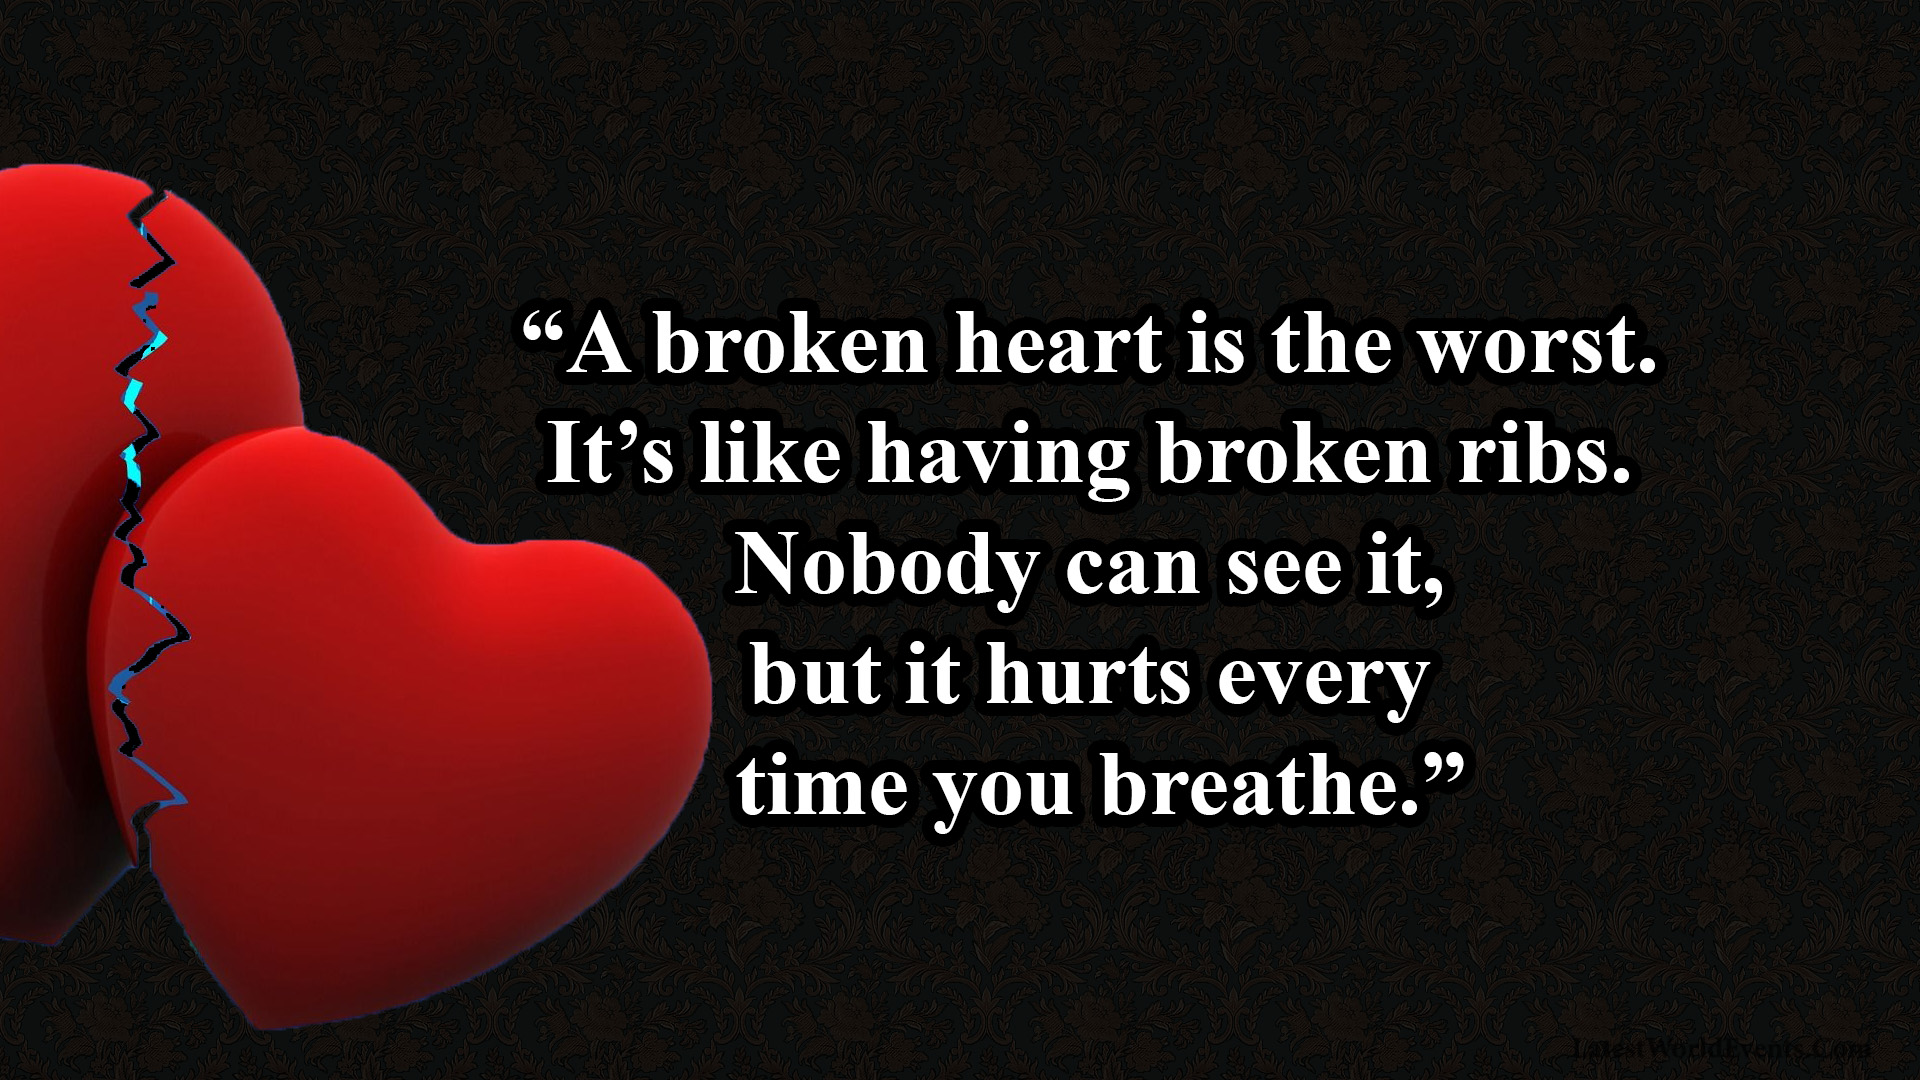 Broken hearted woman. Quotes about broken Heart. Broken Heart quotes. Quotes about heartbroken. Break my heart if you can